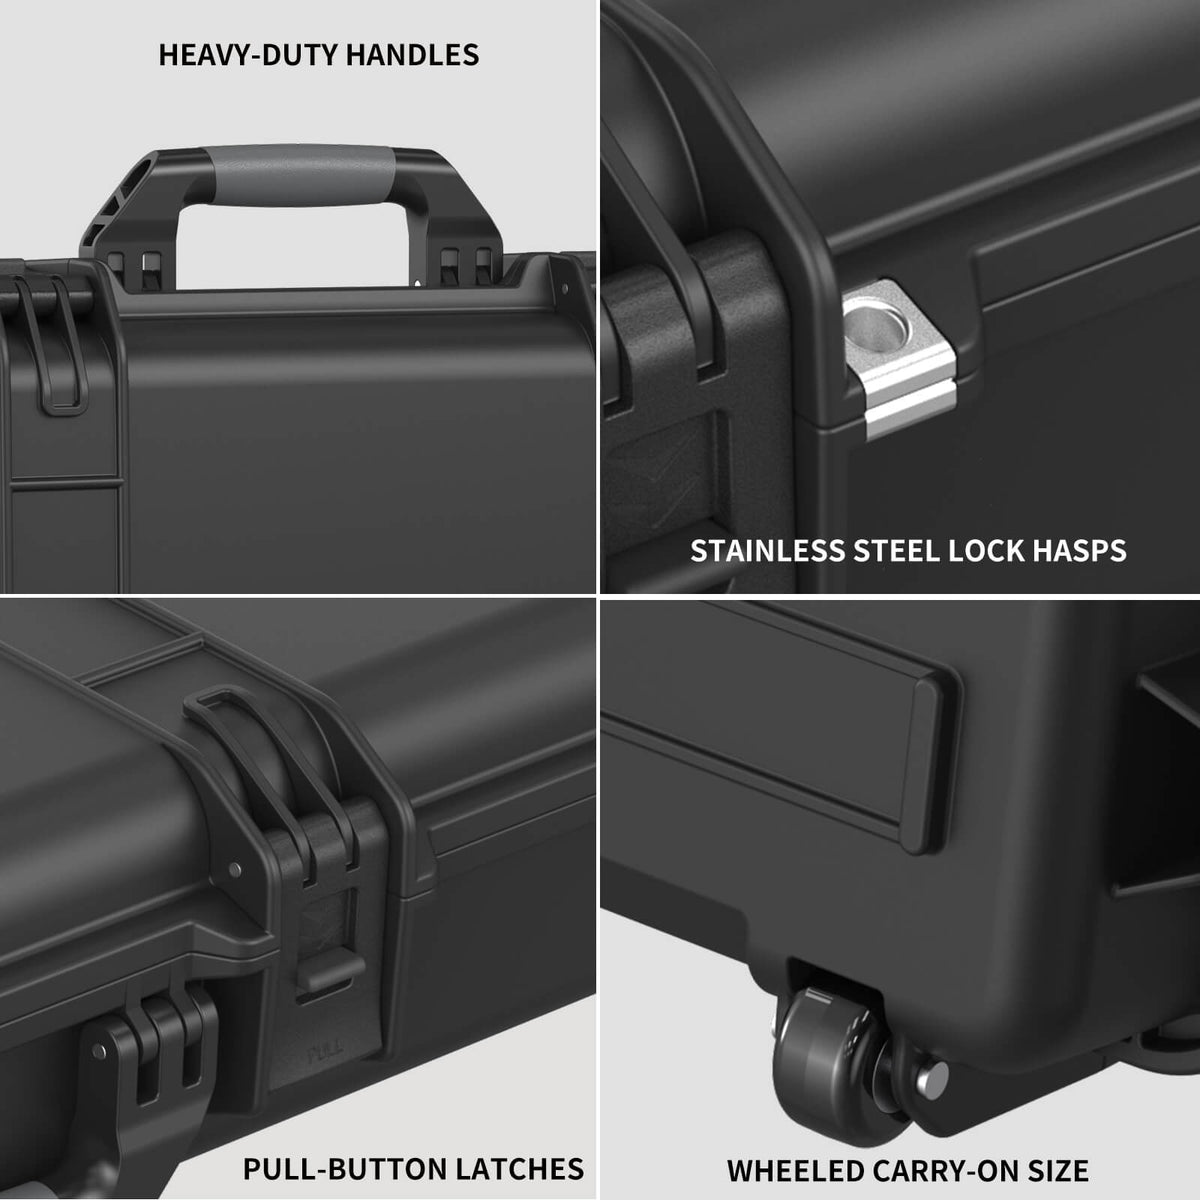 RPNB PP-91139 Weatherproof Hard Rifle Case with Customizable Foam Insert Features